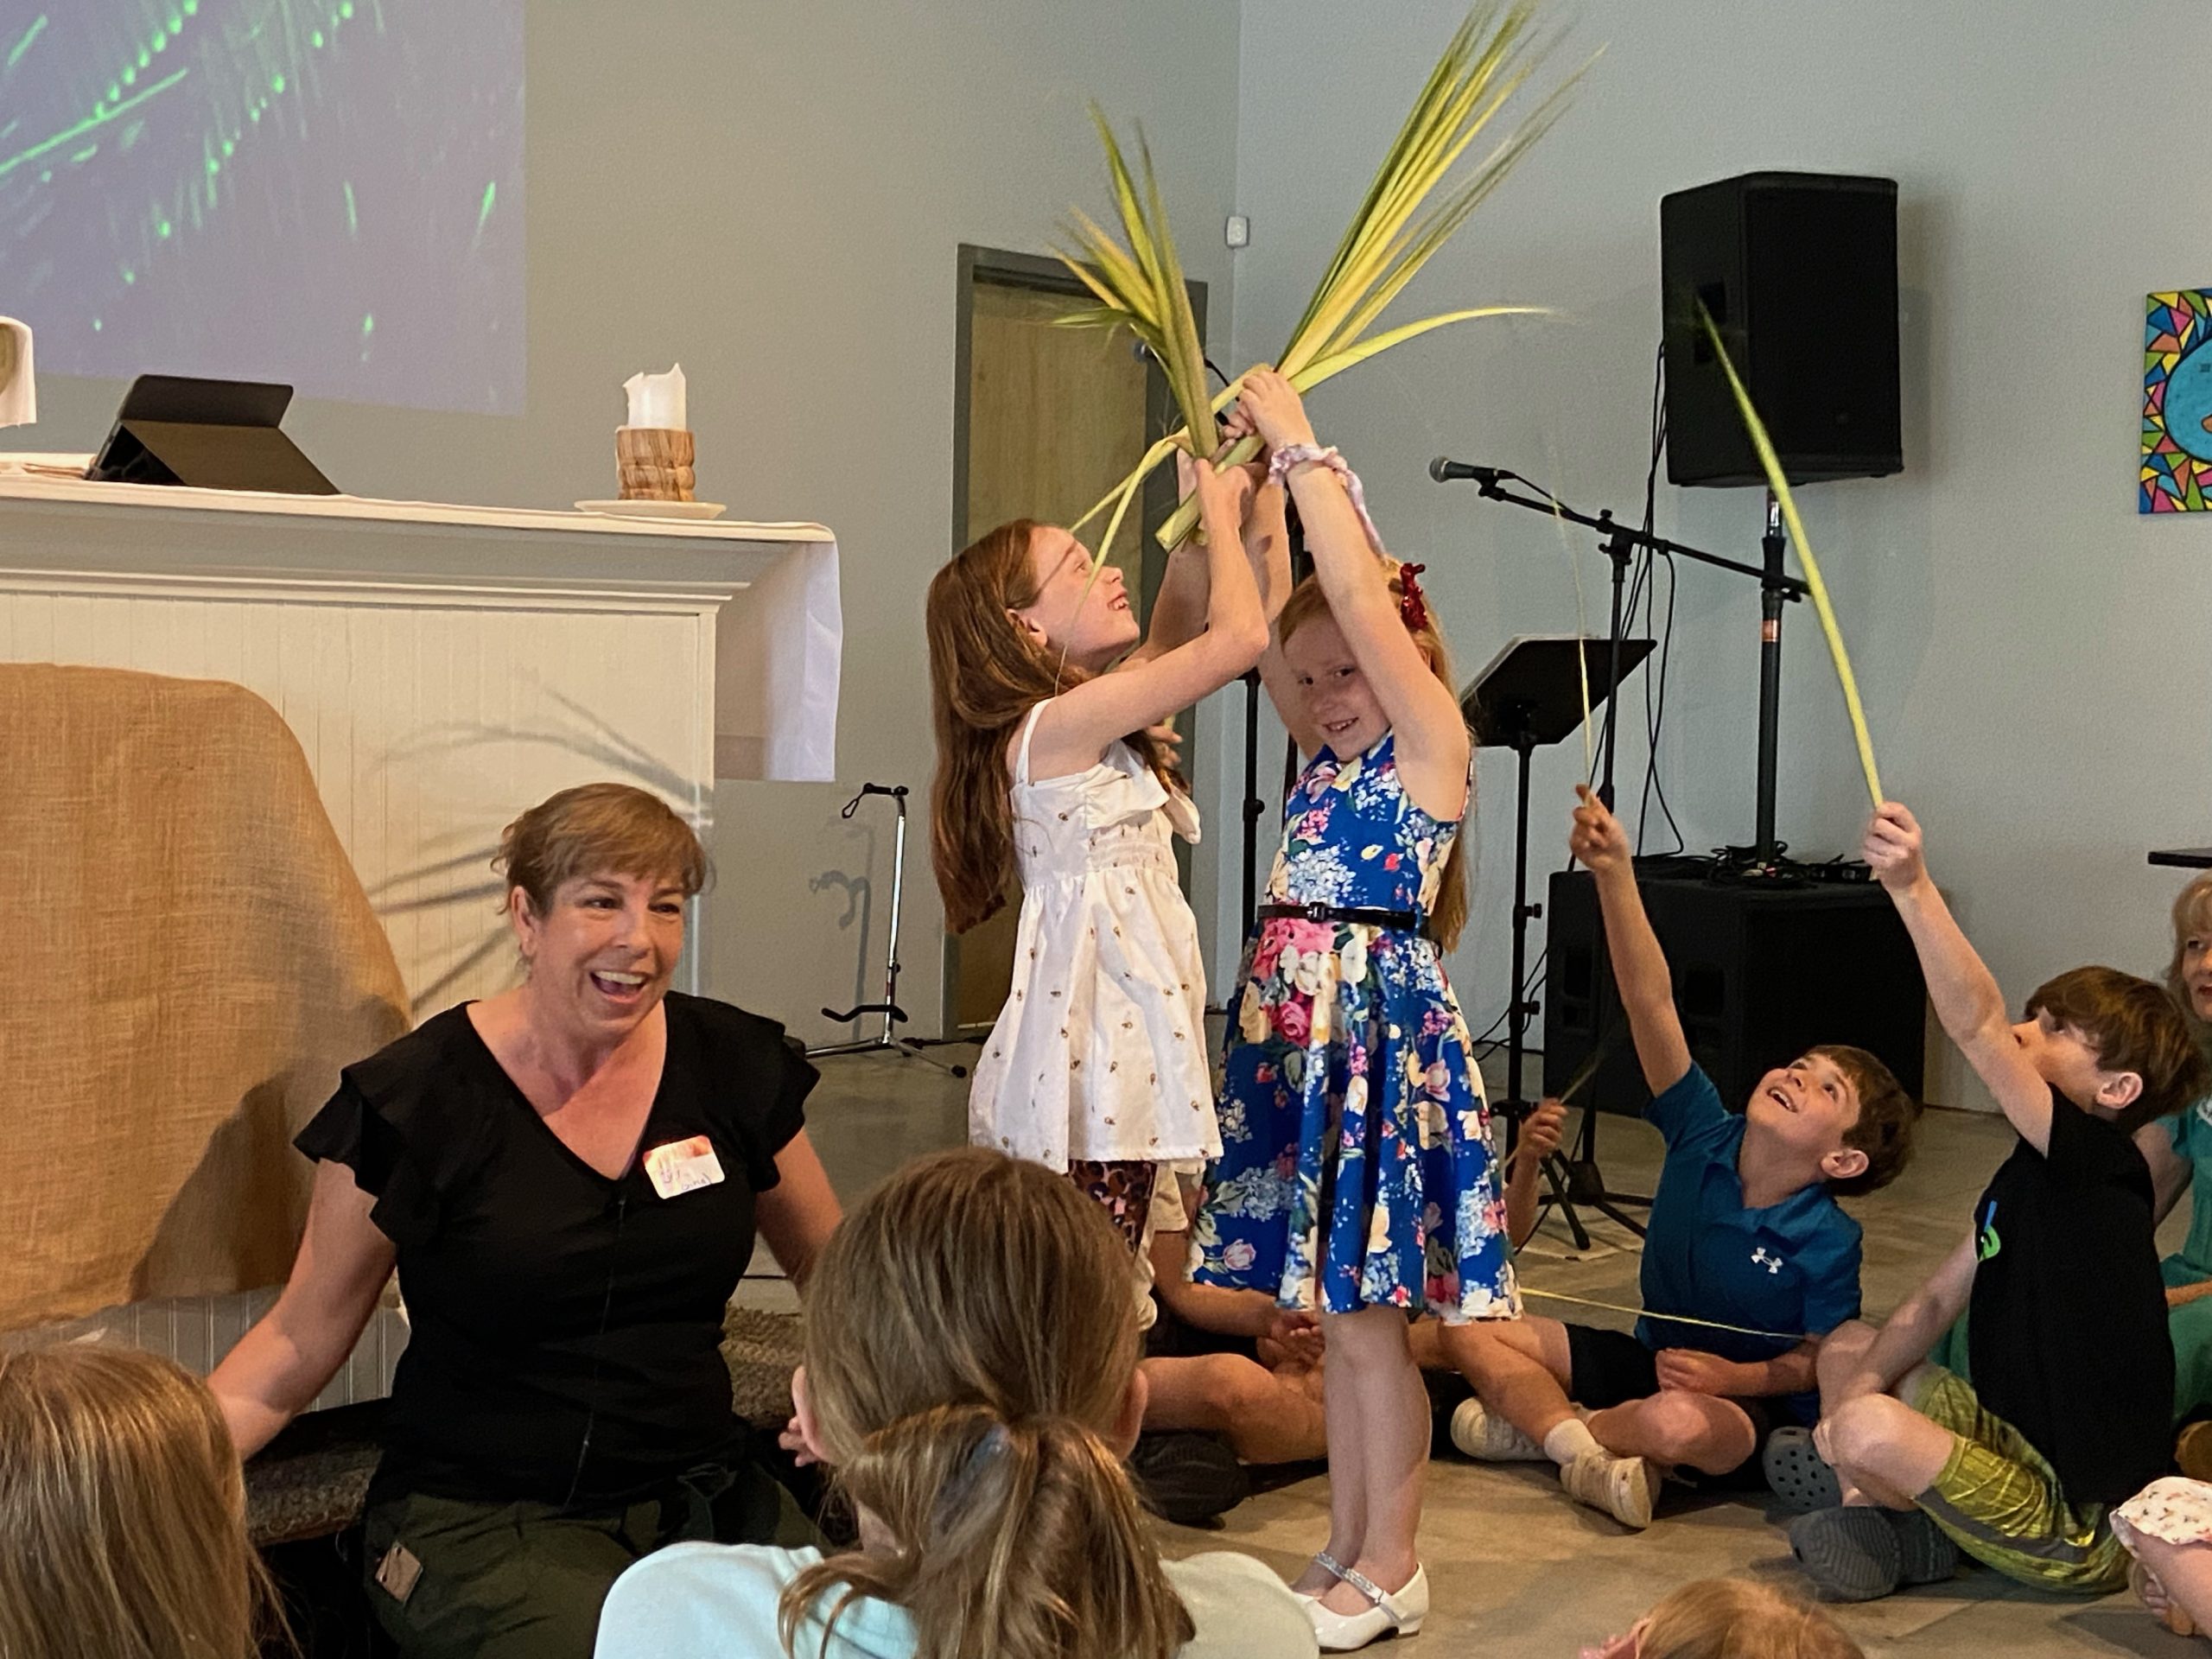 children waving palm leaves in the air and smiling with other children sitting on the floor in front of a smiling woman